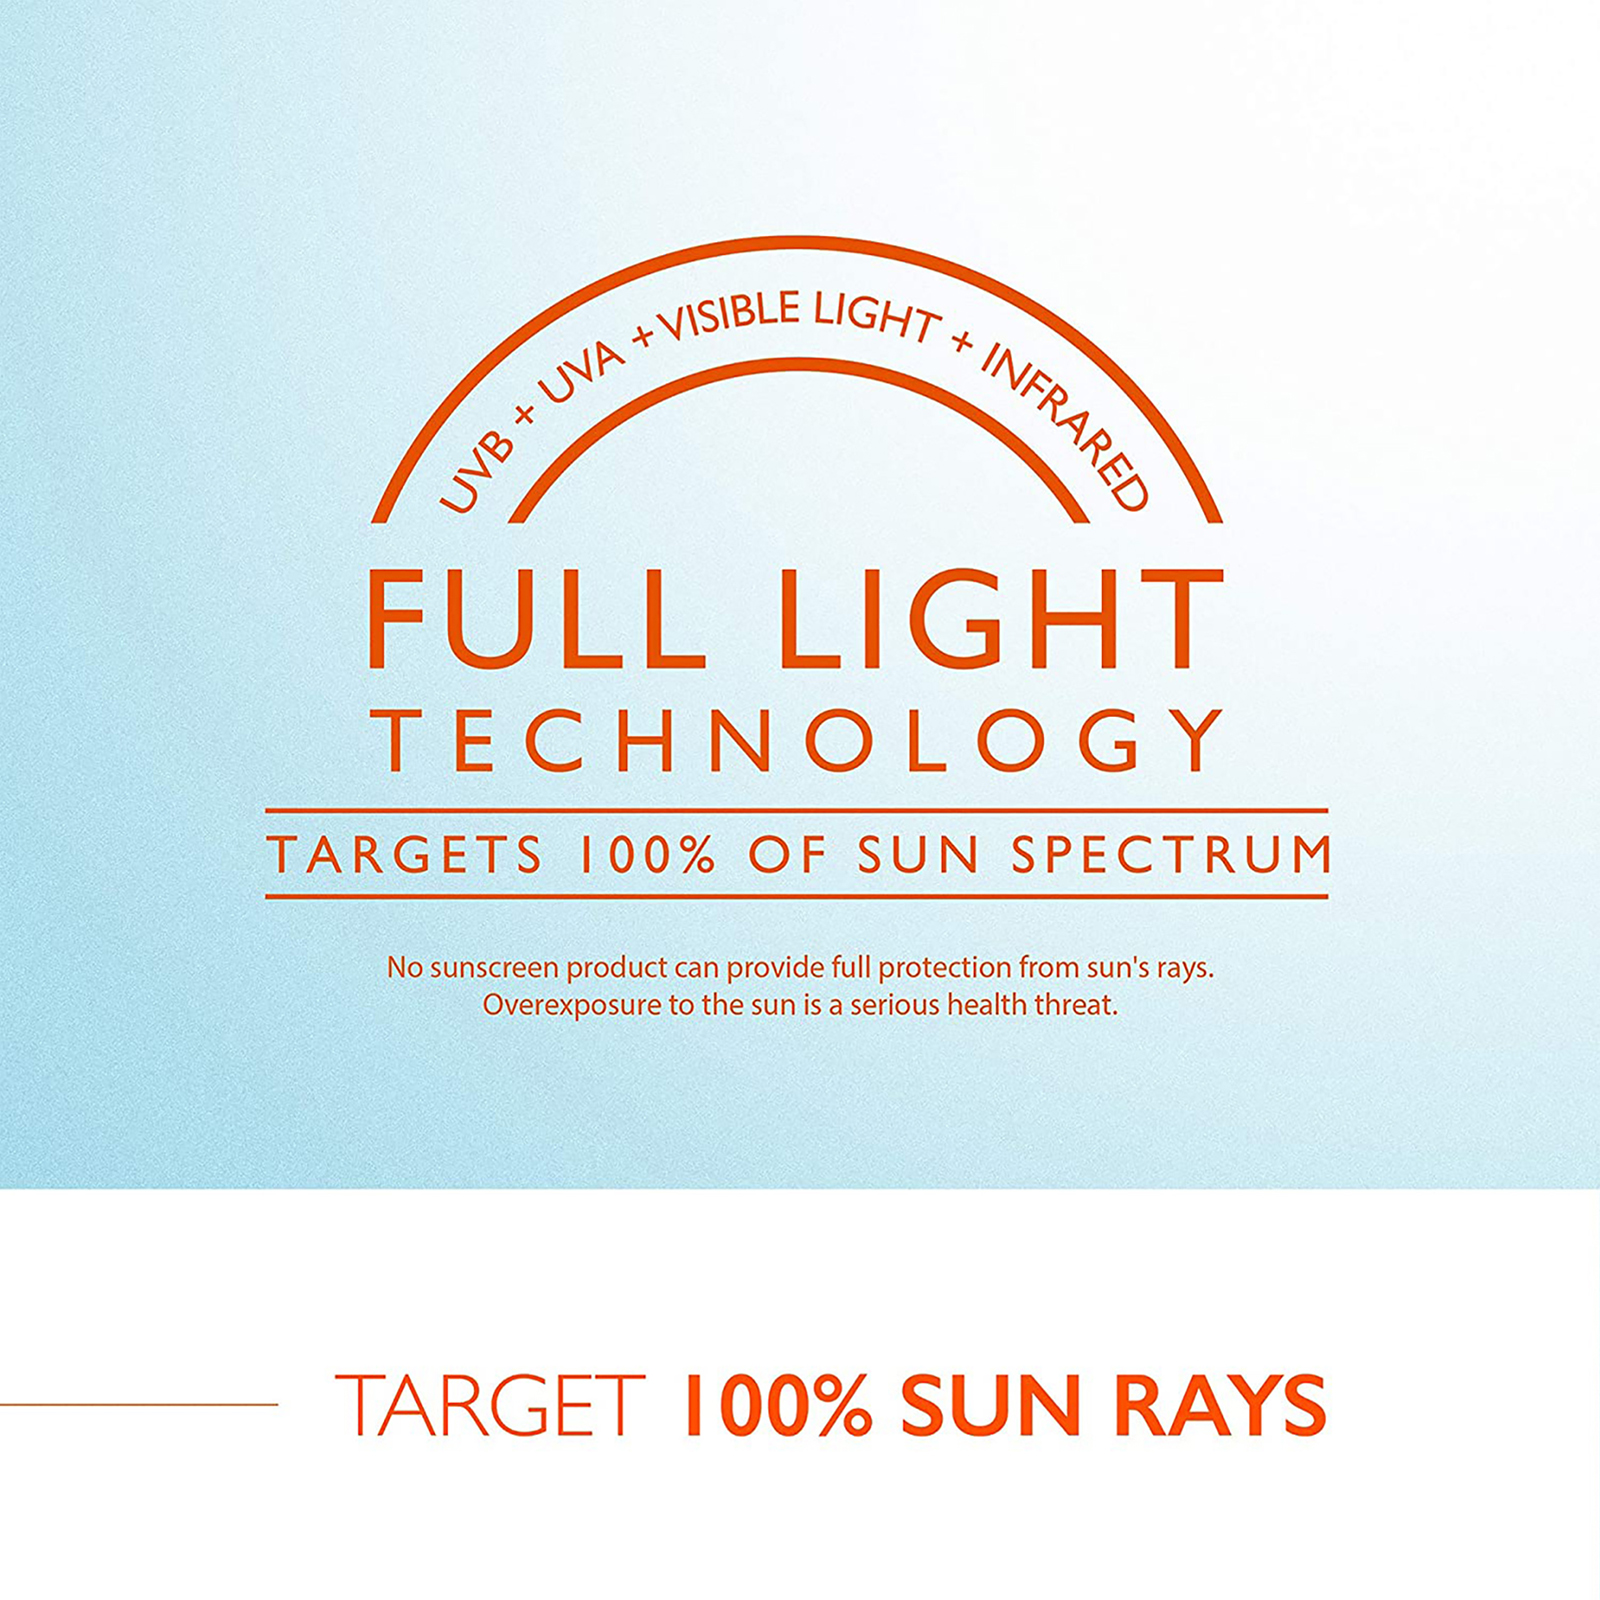 YVB, UVA, visible light, infrared full light technology targets 100% of sun spectrum. No sunscreen product can provide complete protection from the sun's rays. Overexposure to the sun is a serious health threat. Target 100% sun rays 